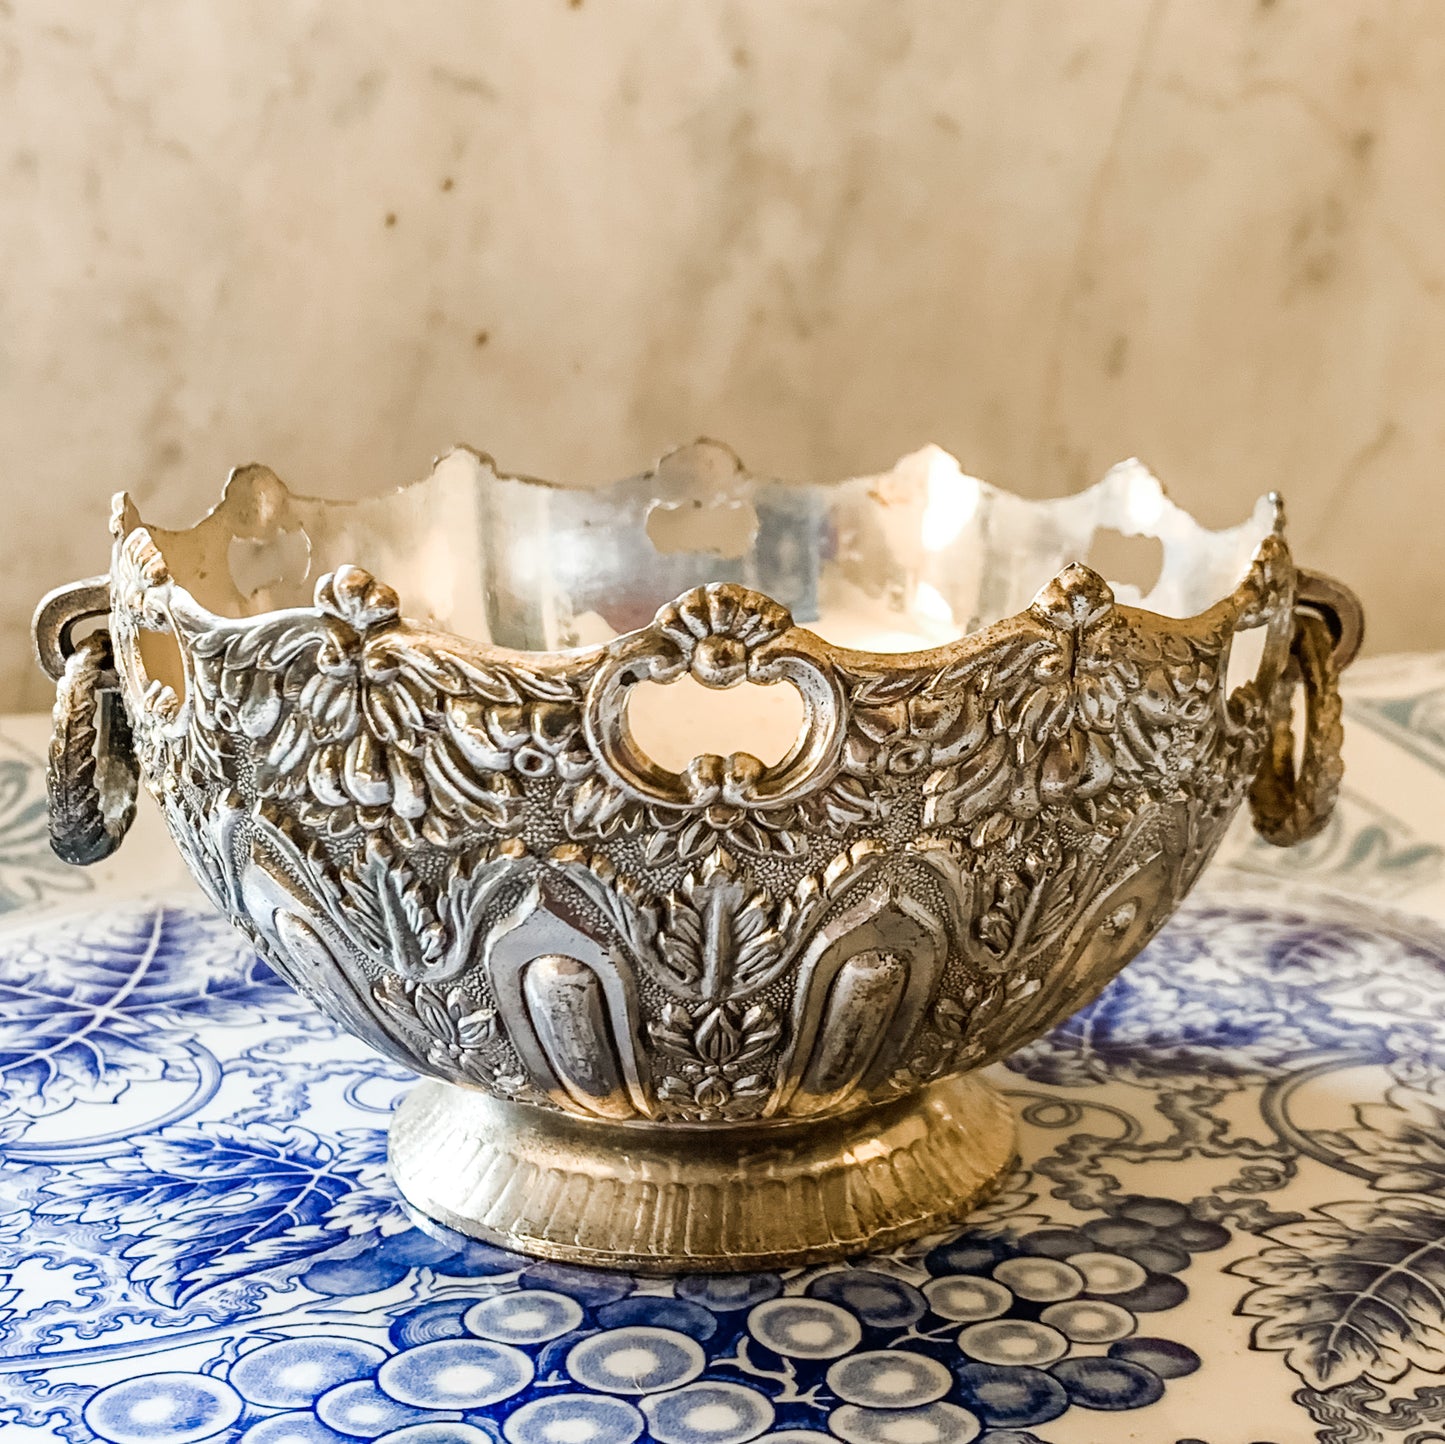 Antique Repousse Silver Bowl with Ring Handles